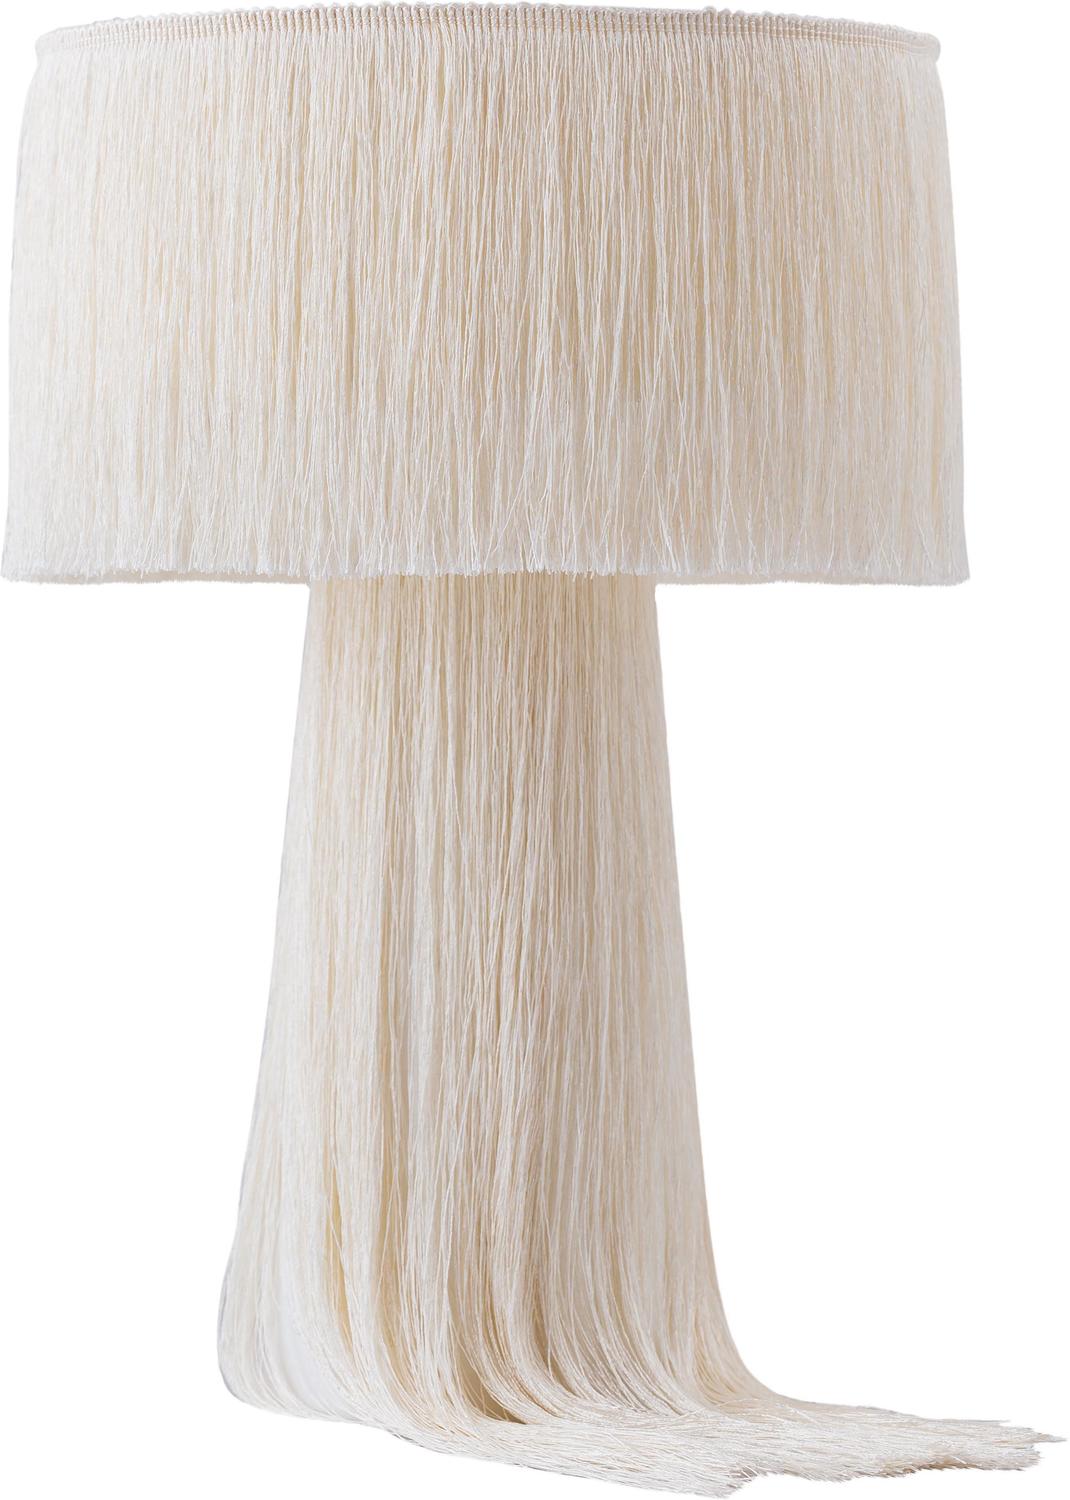  Tov Furniture Table Lamps Accent Tables Cream